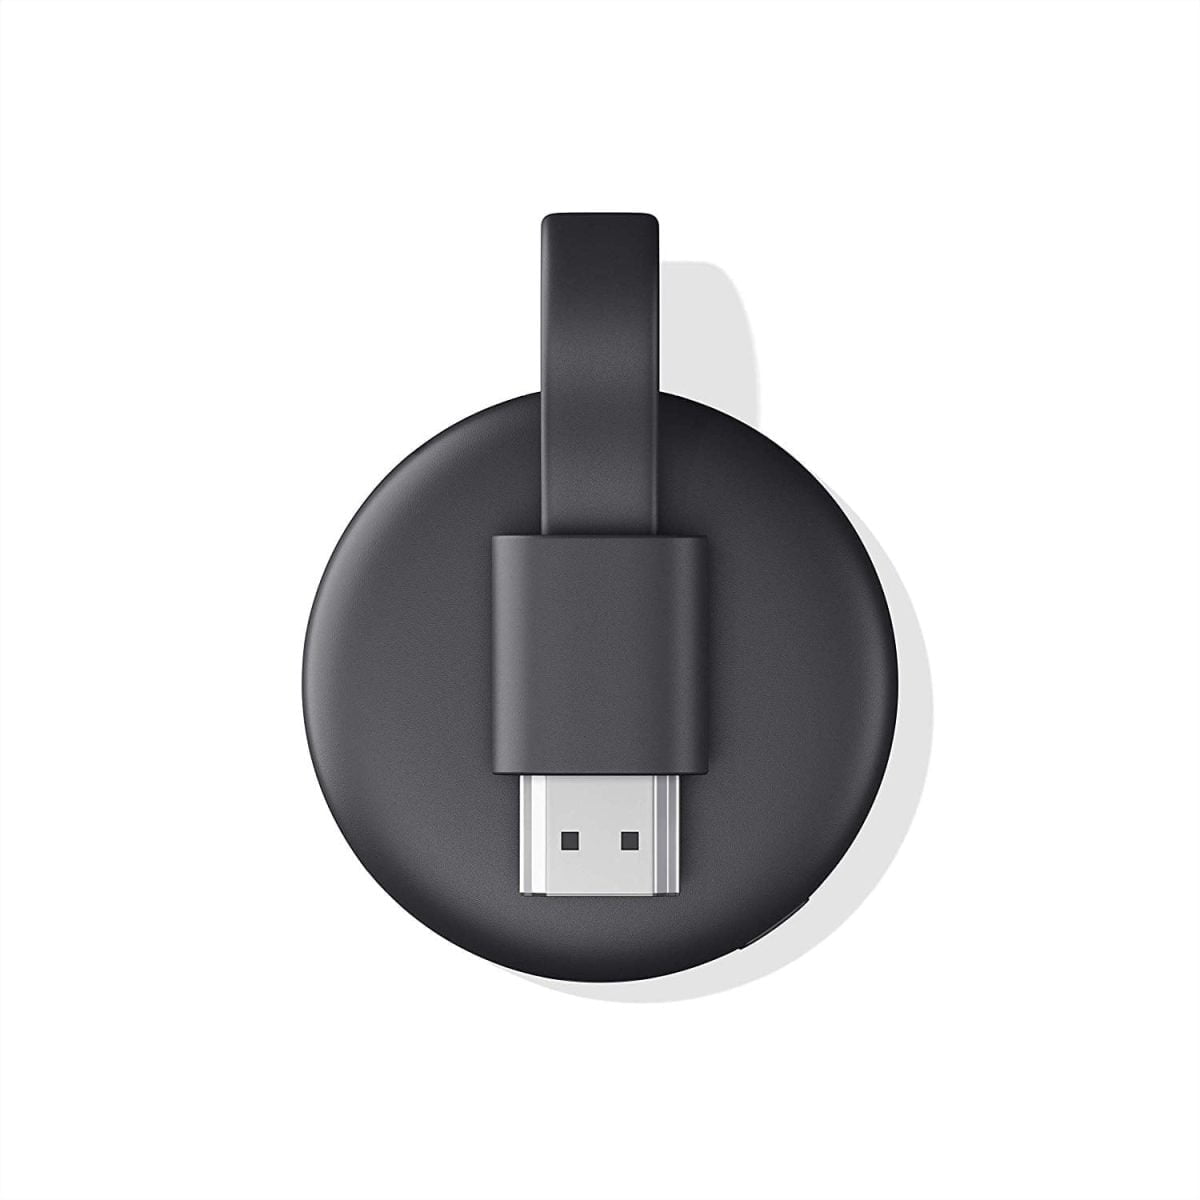 Google Chromecast 3Rd Gneration Media Streamer2 Google &Lt;Div Class=&Quot;Jsx-115903991 Jsx-3349621030&Quot;&Gt; &Lt;Div Class=&Quot;Jsx-1889249662 Overviewsection&Quot;&Gt;Google Chromecast 3 Makes Your Tv Smarter! You Can Now Stream Entertainment Directly From Your Phone And Other Devices To Your Tv. Use Your Phone Or Device To Stream Tv Shows, Movies, Games And More From 800+ Plus Compatible Apps, Including Youtube, Netflix, Hotstar, Sonyliv, Gaana Etc. With 15% Higher Hardware Speed, The New Chromecast Supports 1080P And Is Google Assistant-Enabled. Chromecast Plugs Into Your Tv'S Hdmi Port And Works With Iphone, Ipad, Android Phone And Tablet, Mac And Windows Laptop And Chromebook. During Streaming, Your Device Is Free To Be Used For Calls, Messages Without Interrupting The Tv Screen. You Can Control The Playback From Any Part Of The Wifi-Enabled House. No Additional Remote(S) Required.&Lt;/Div&Gt; &Lt;/Div&Gt; &Nbsp; Google Chromecast 3Rd Gneration Media Streamer Google Chromecast 3Rd Gneration Media Streamer